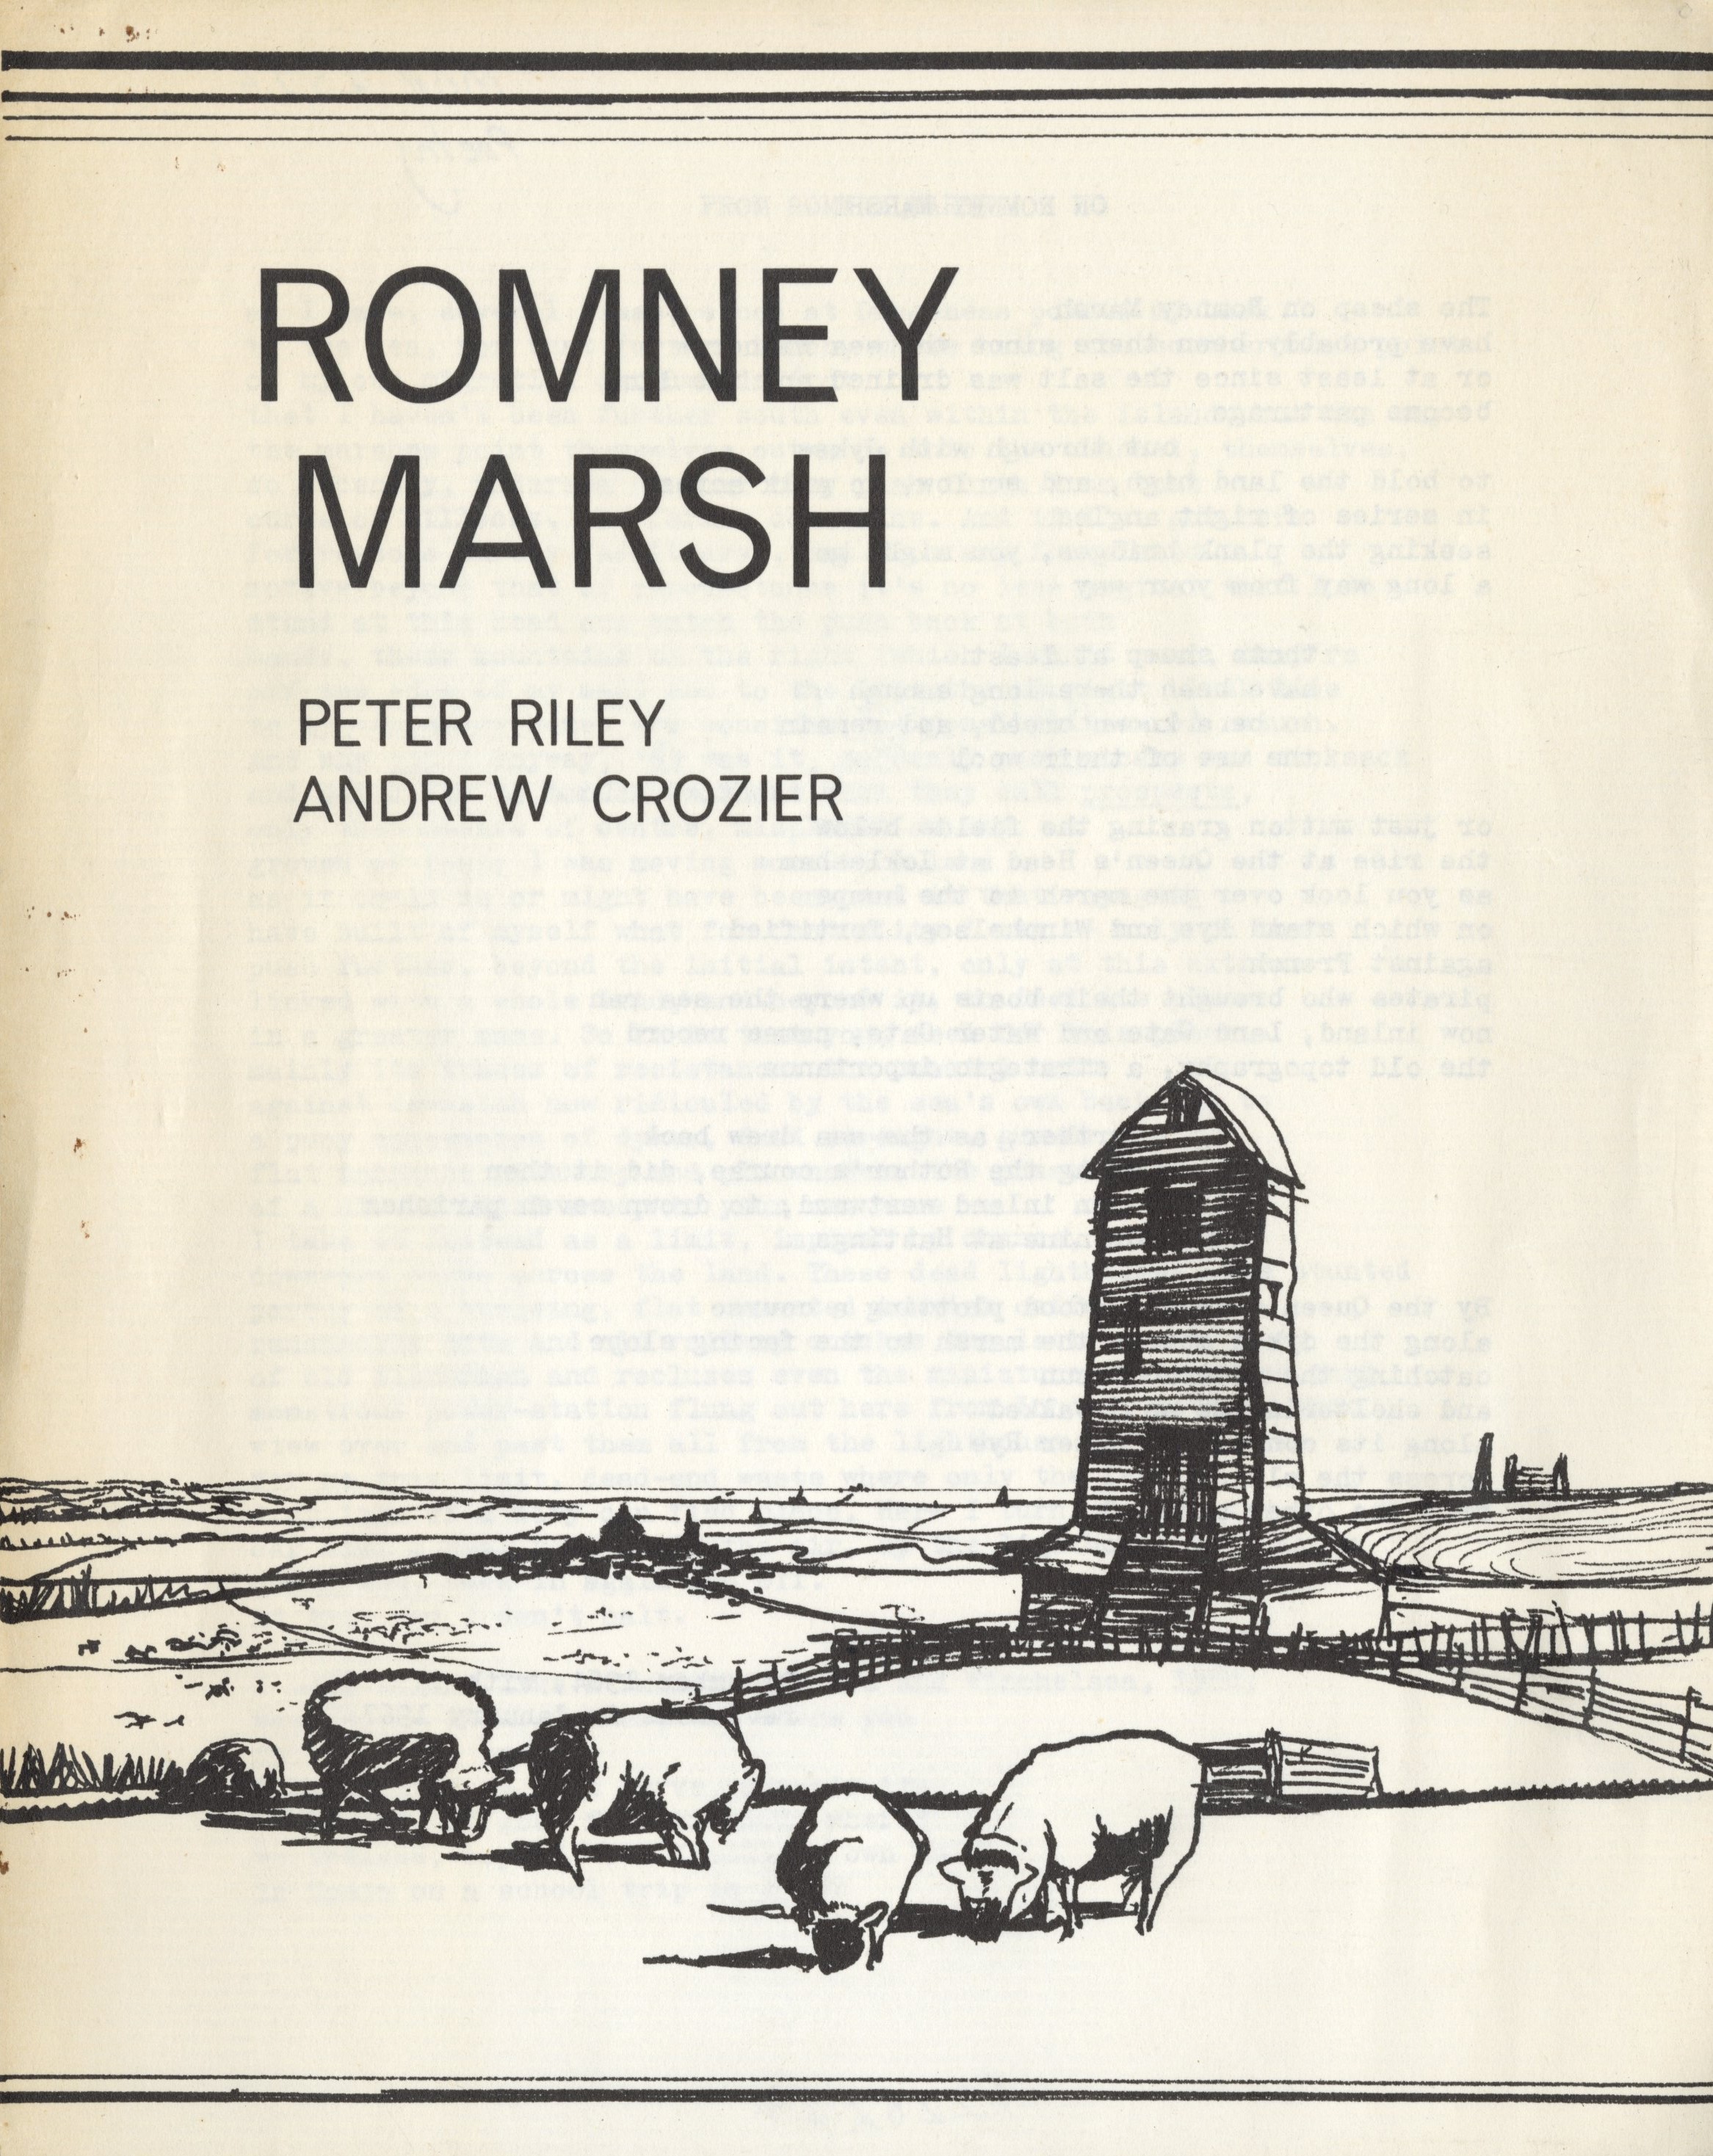 Front cover of the poem Romney Marsh by peter Riley and Andrew Crozier. The cover shows a drawing of a rural scene with sheep in the foreground, fields into the distance, and a mill without sails.  